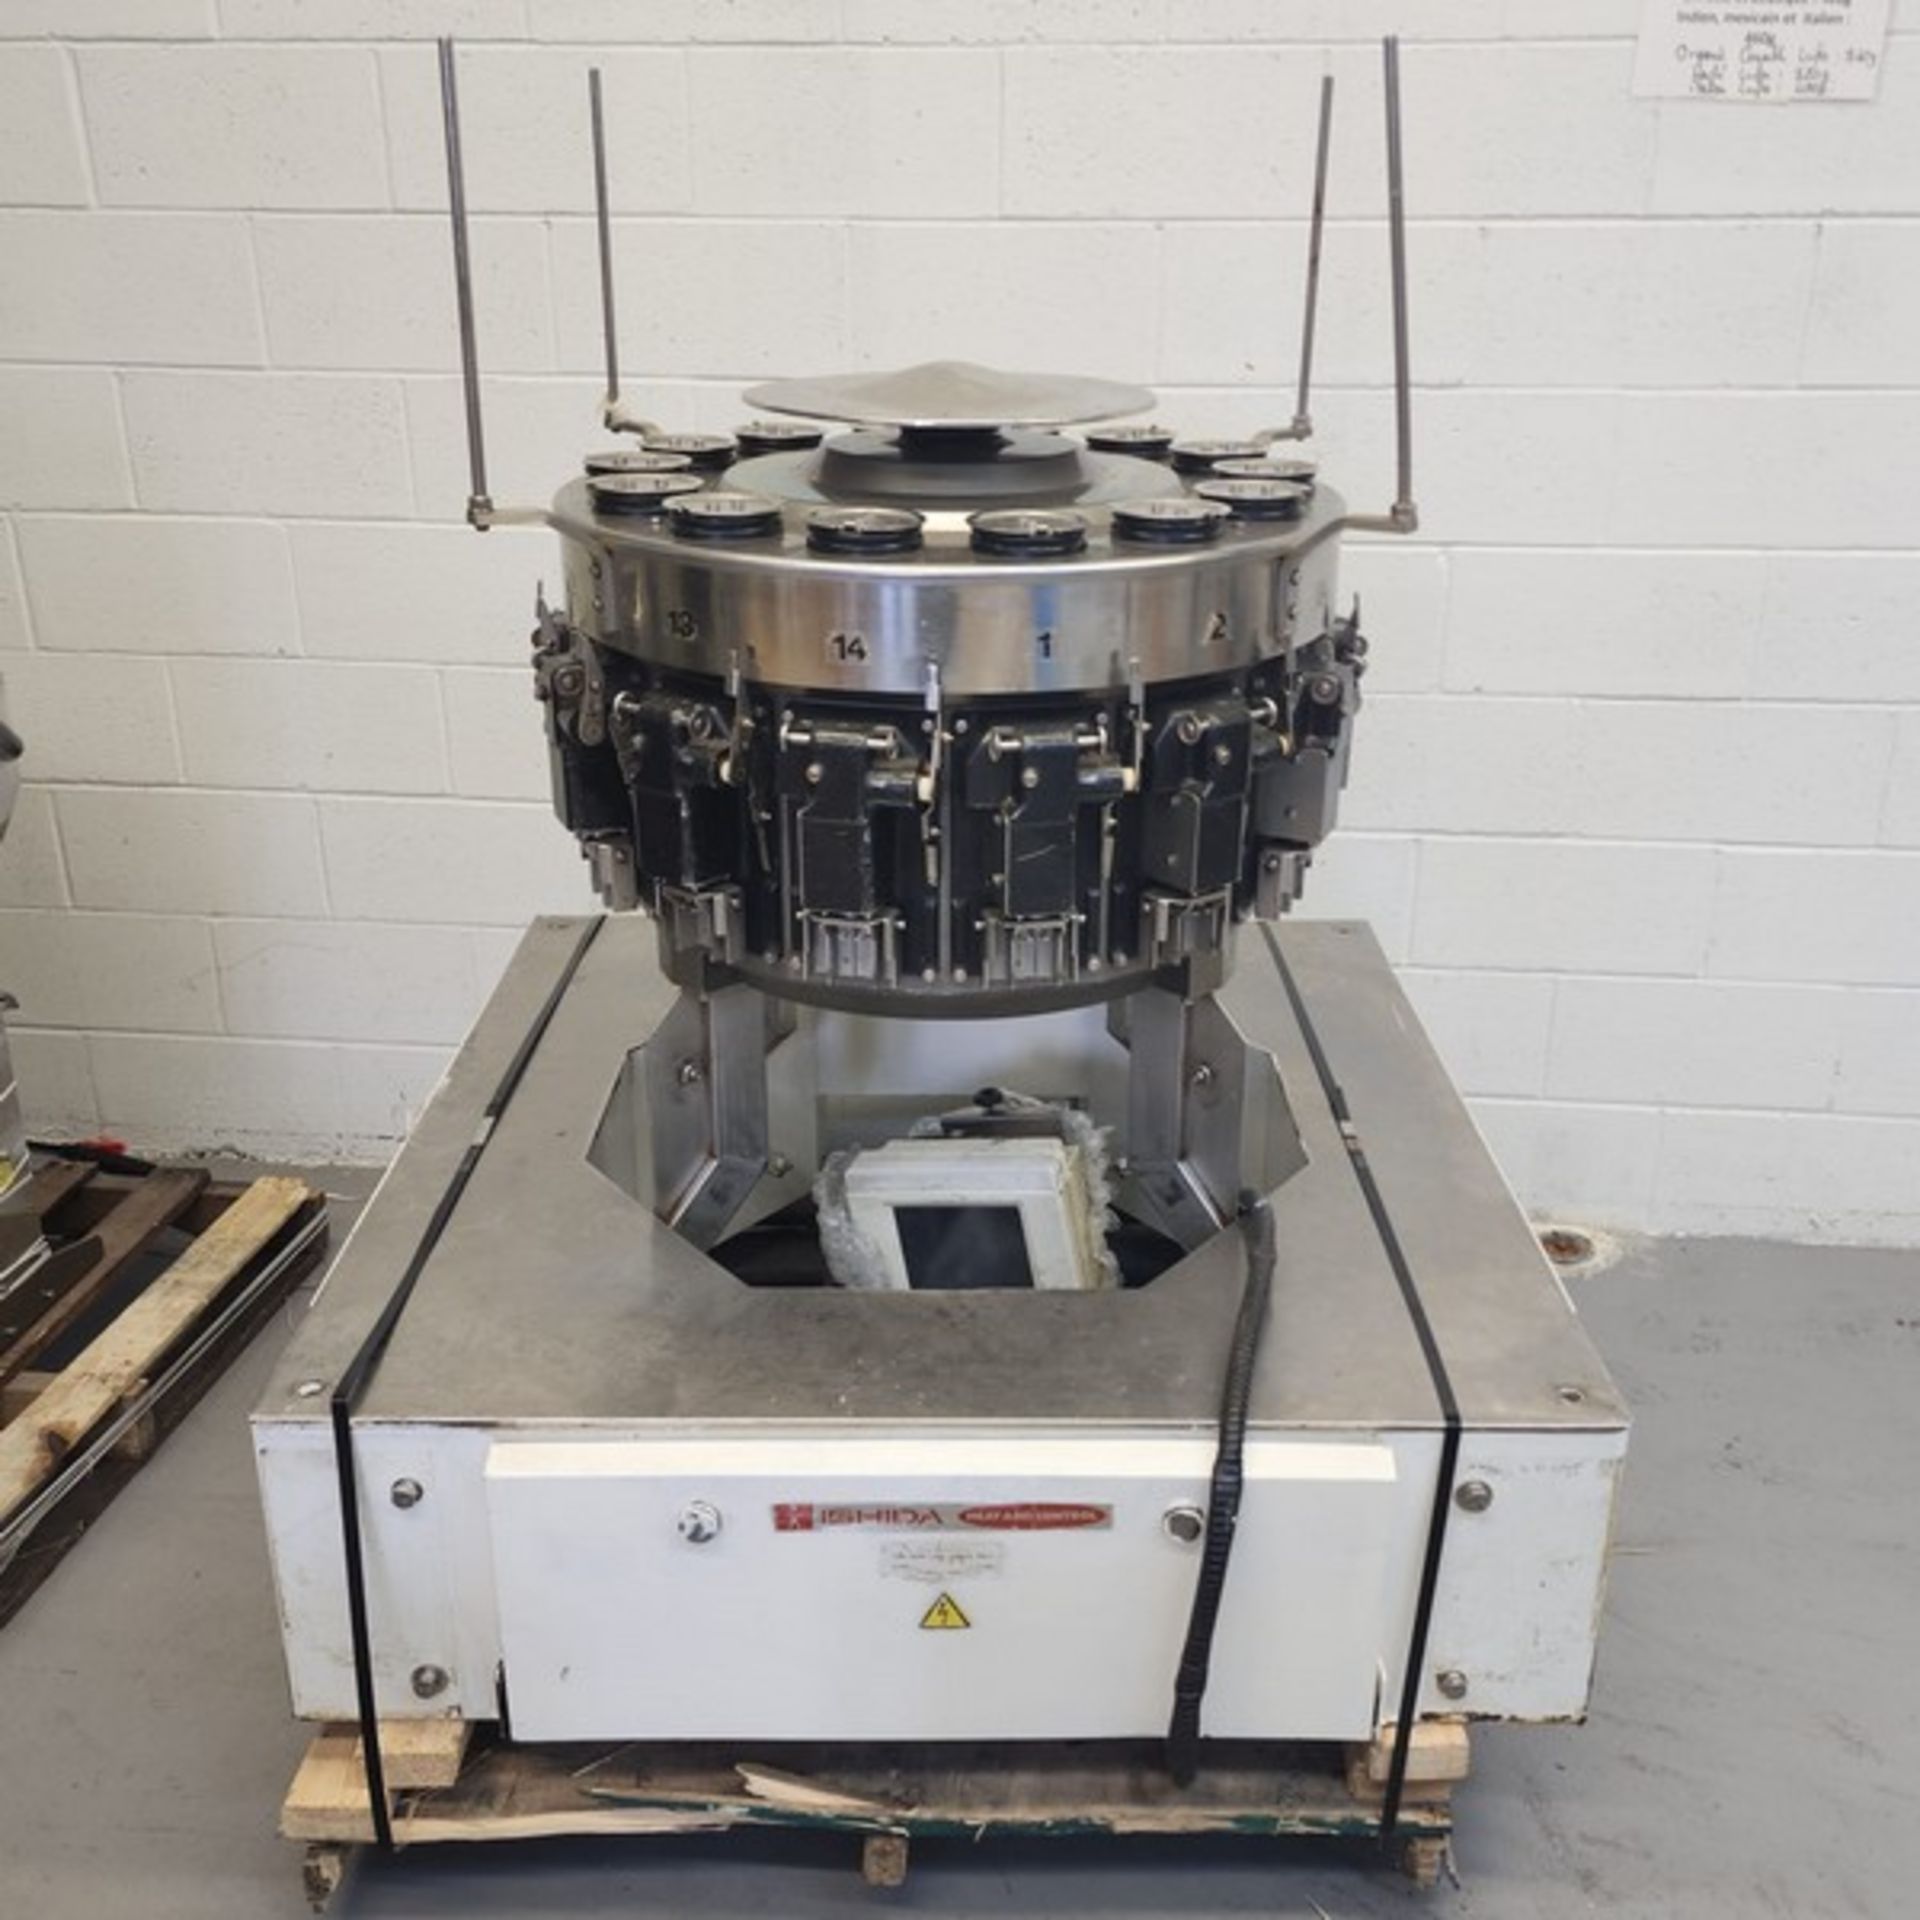 Ishida Radial scale 14 heads 208 volts 3 phase (complete) (Inv. #301C) (Loading Fee $200) (Located